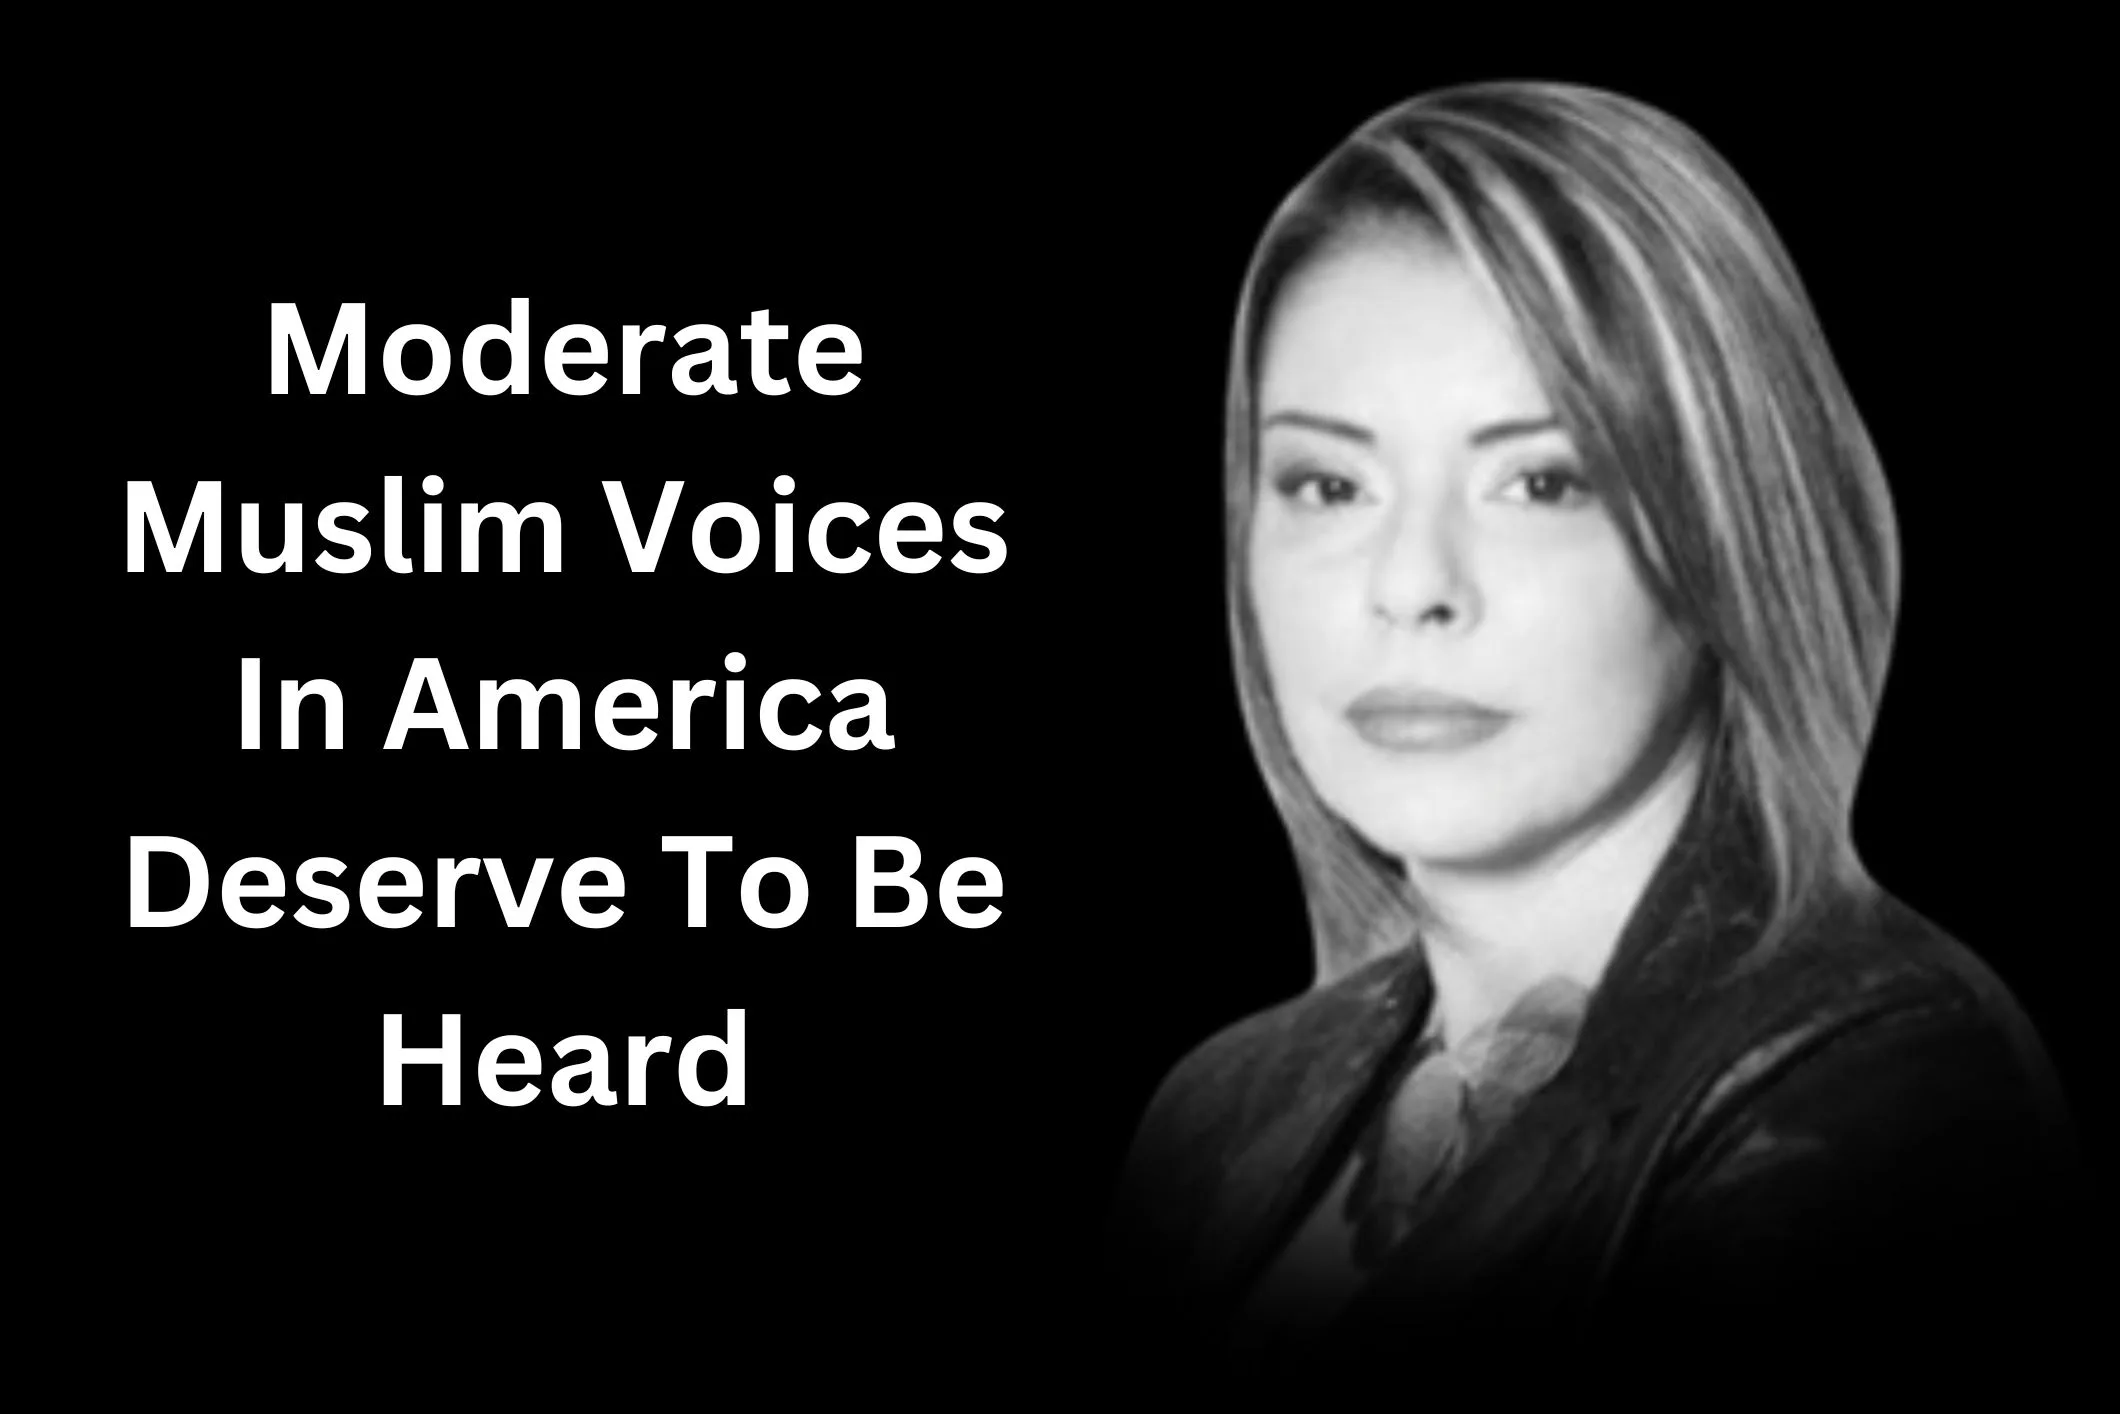 Moderate Muslim Voices In America Deserve To Be Heard